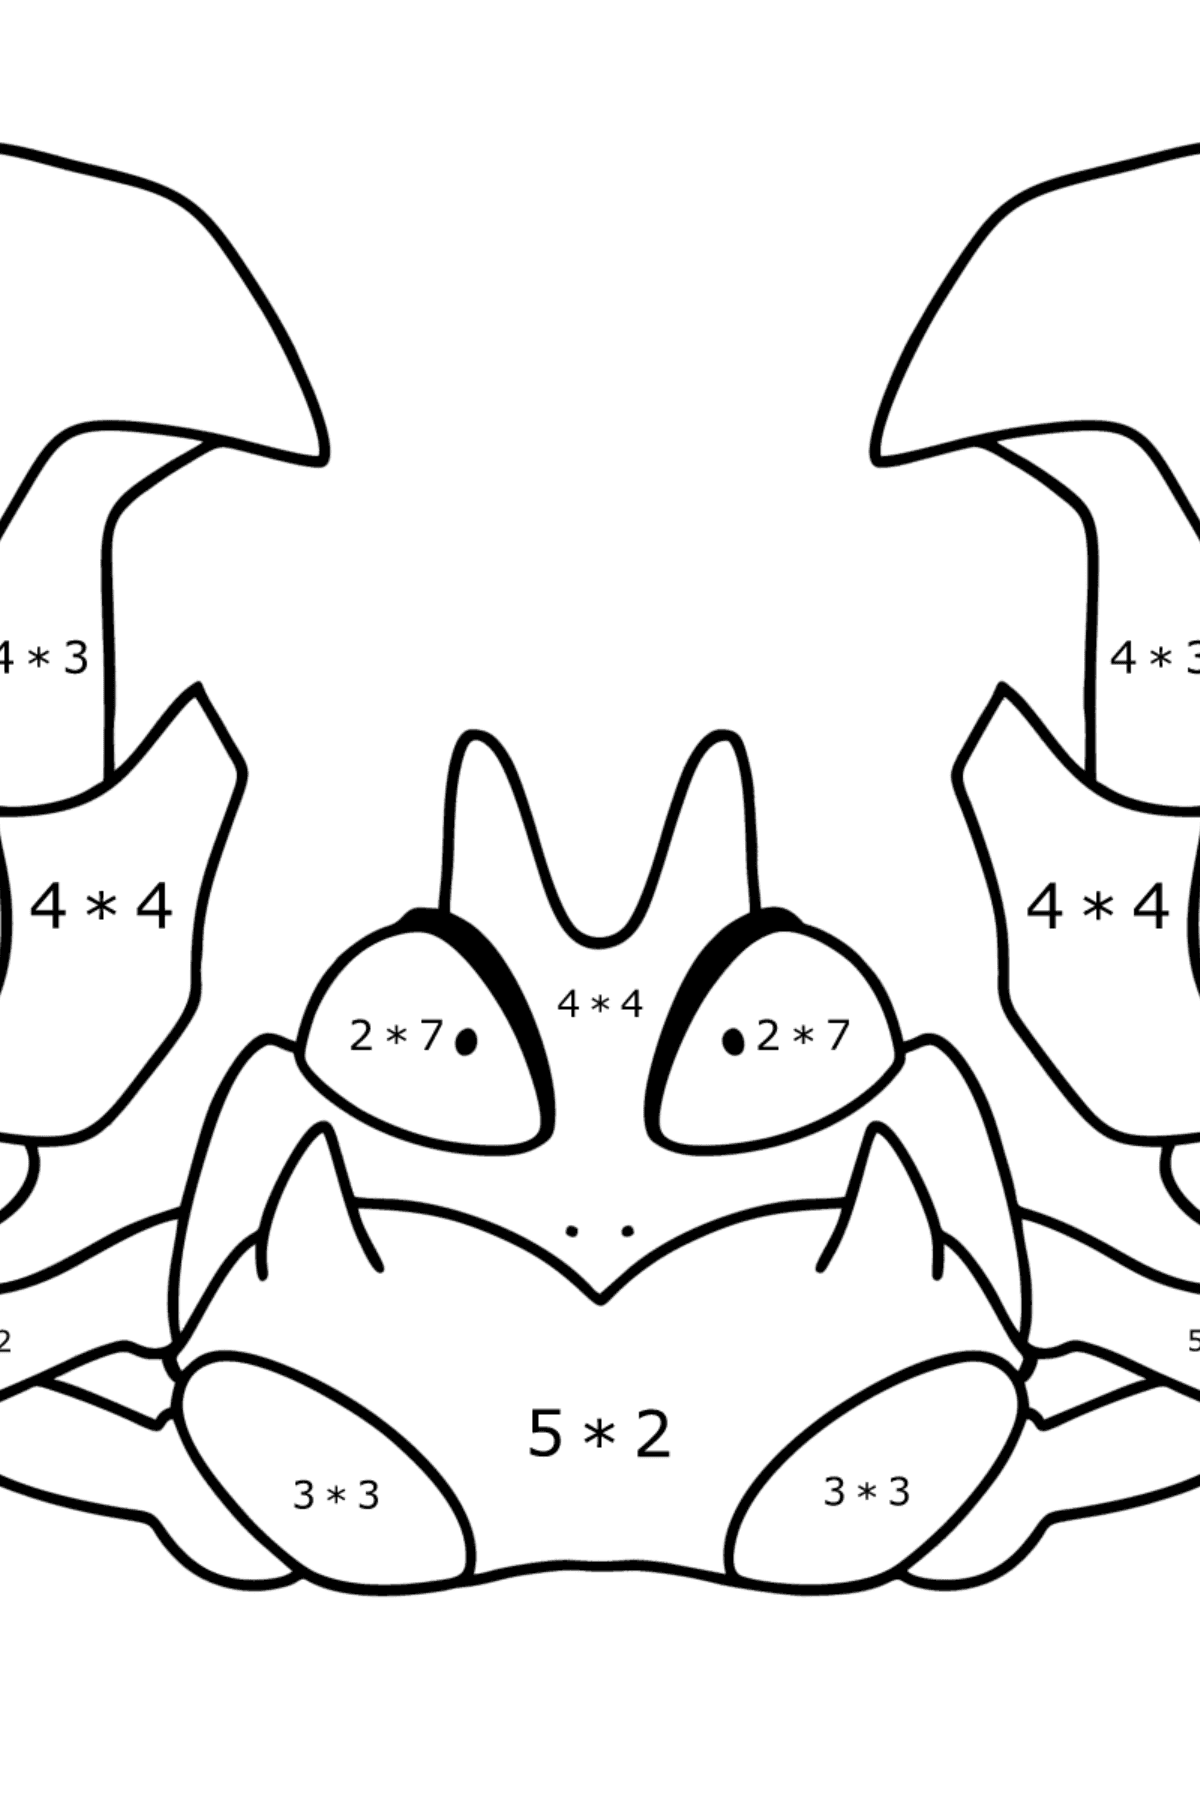 Pokemon Go Krabby coloring page - Math Coloring - Multiplication for Kids